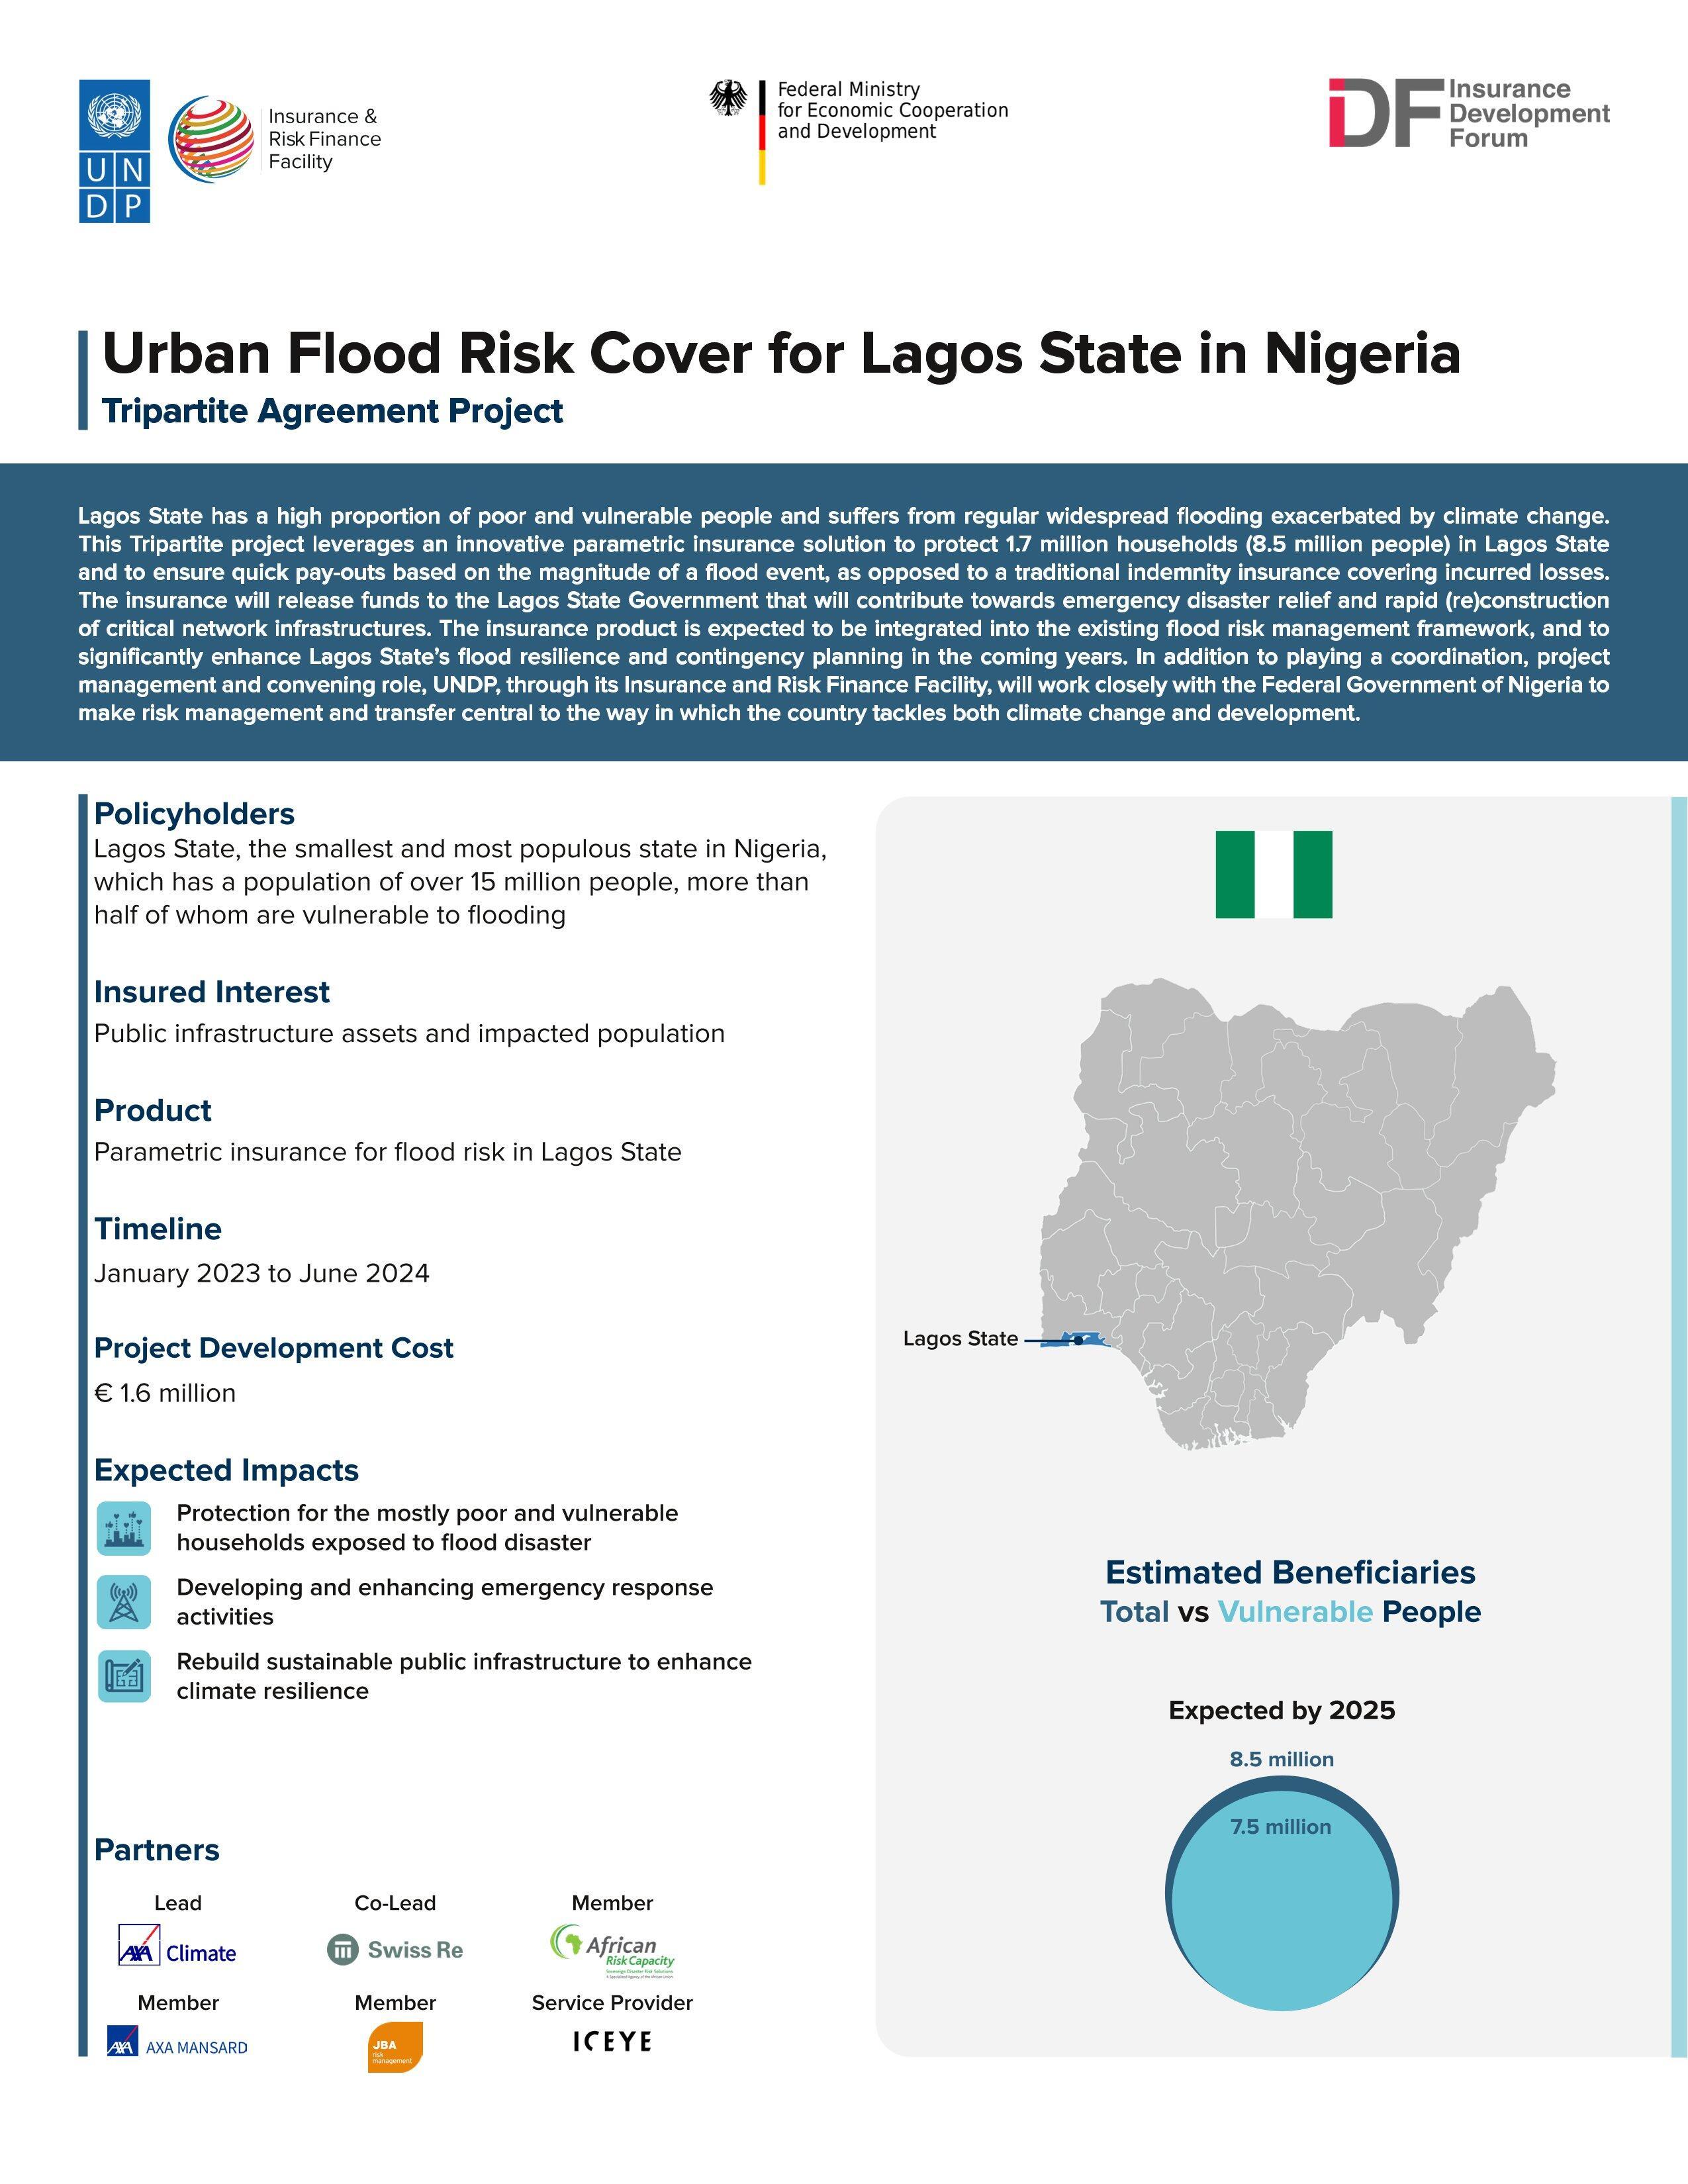 Urban flood risk cover for Lagos State in Nigeria